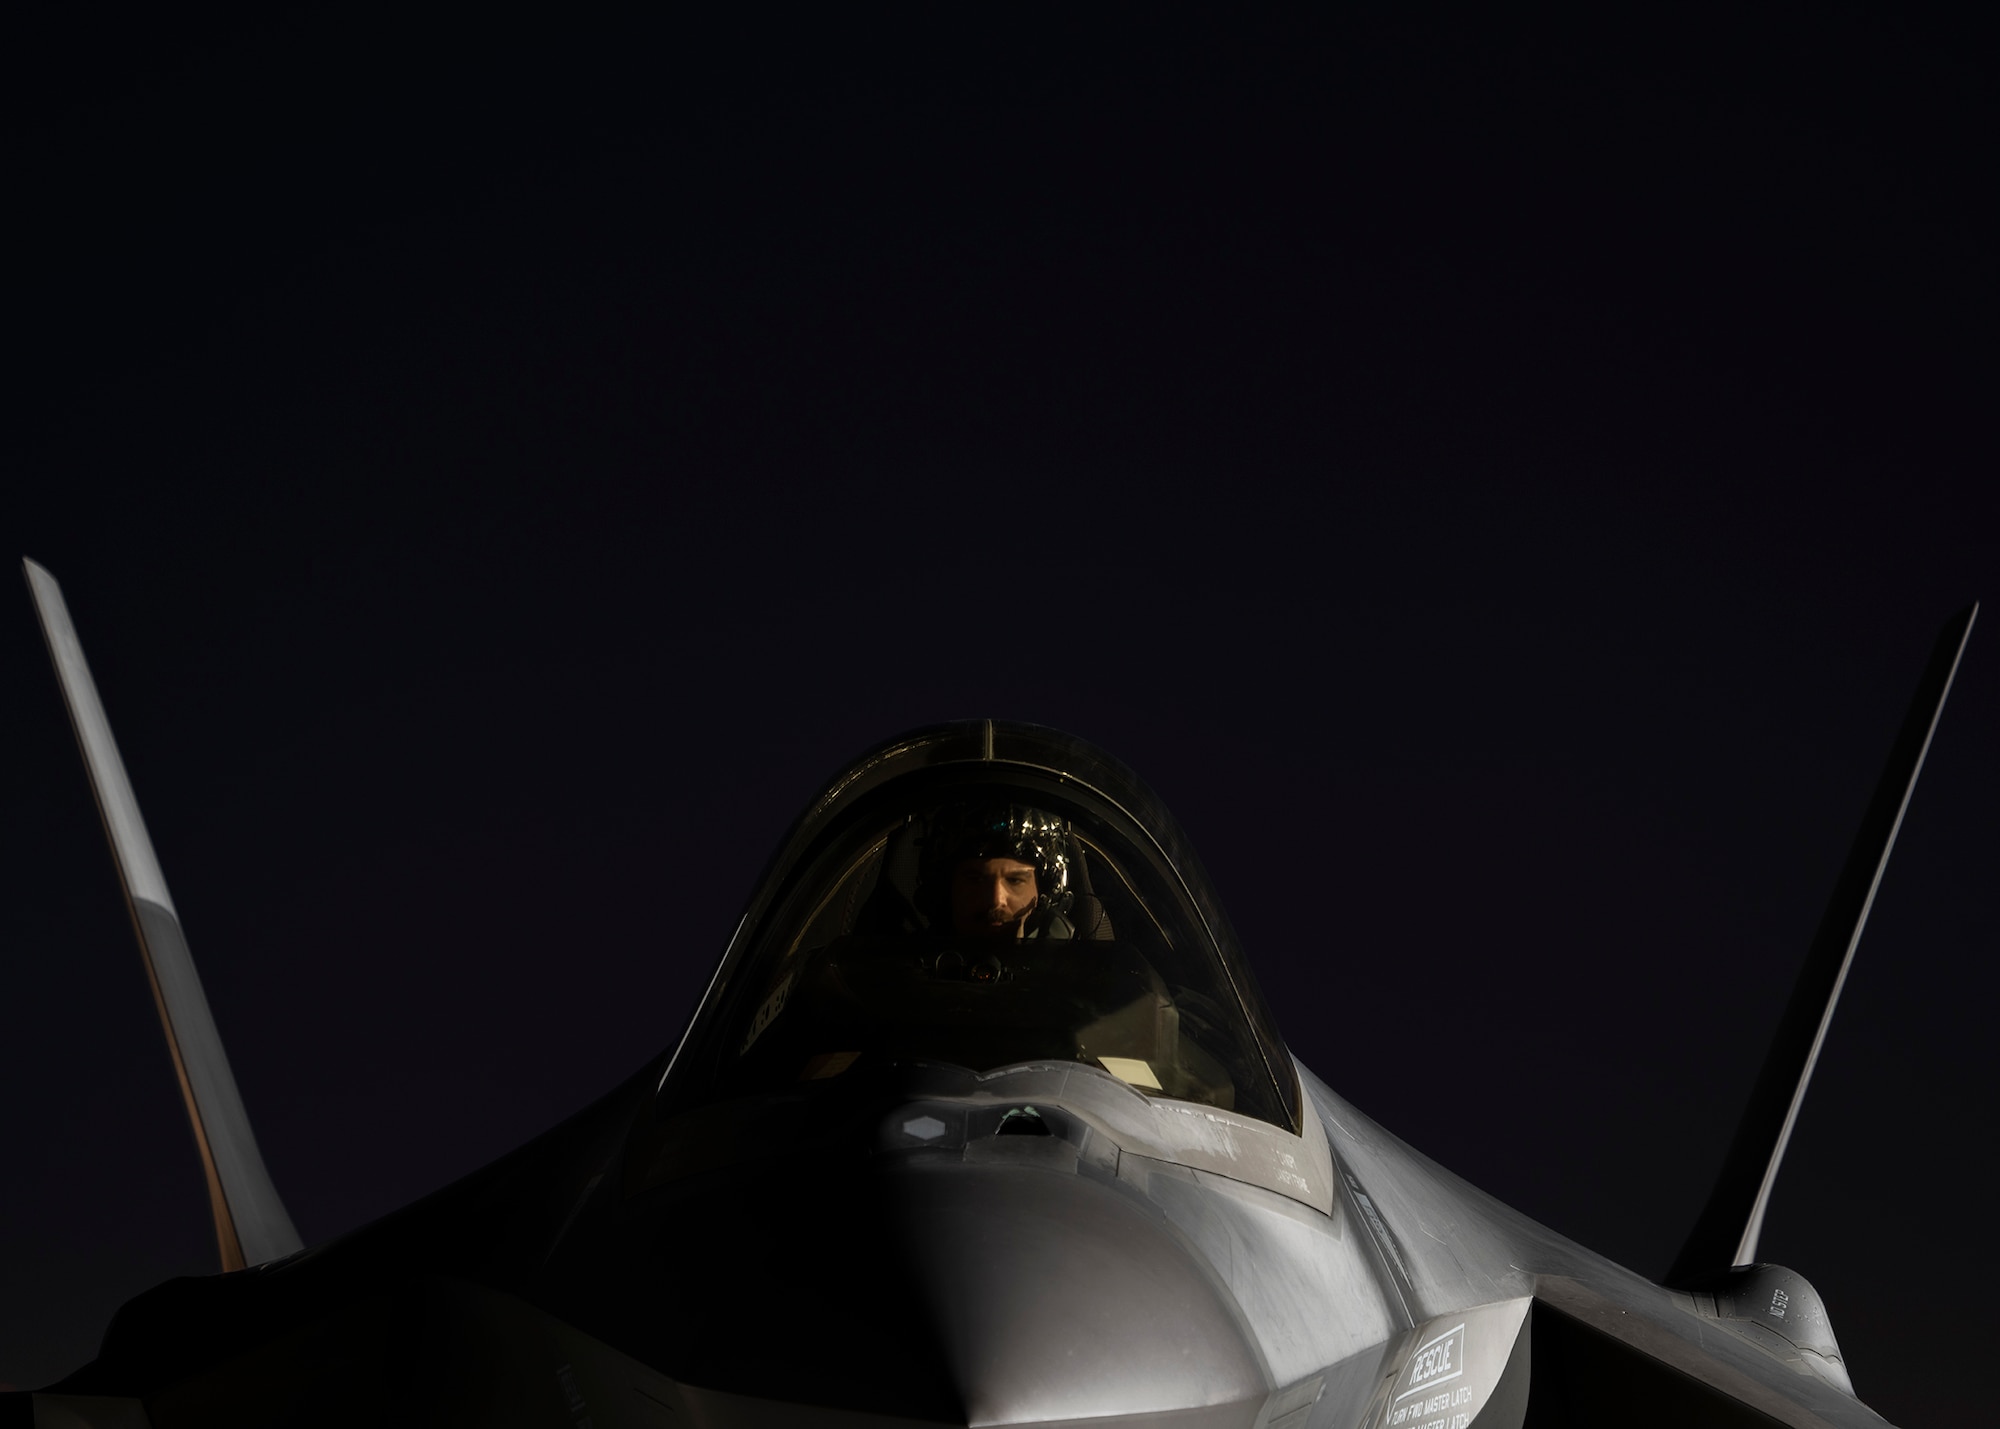 An F-35A Lightning II fighter jet pilot sits in the cockpit of an F-35A.